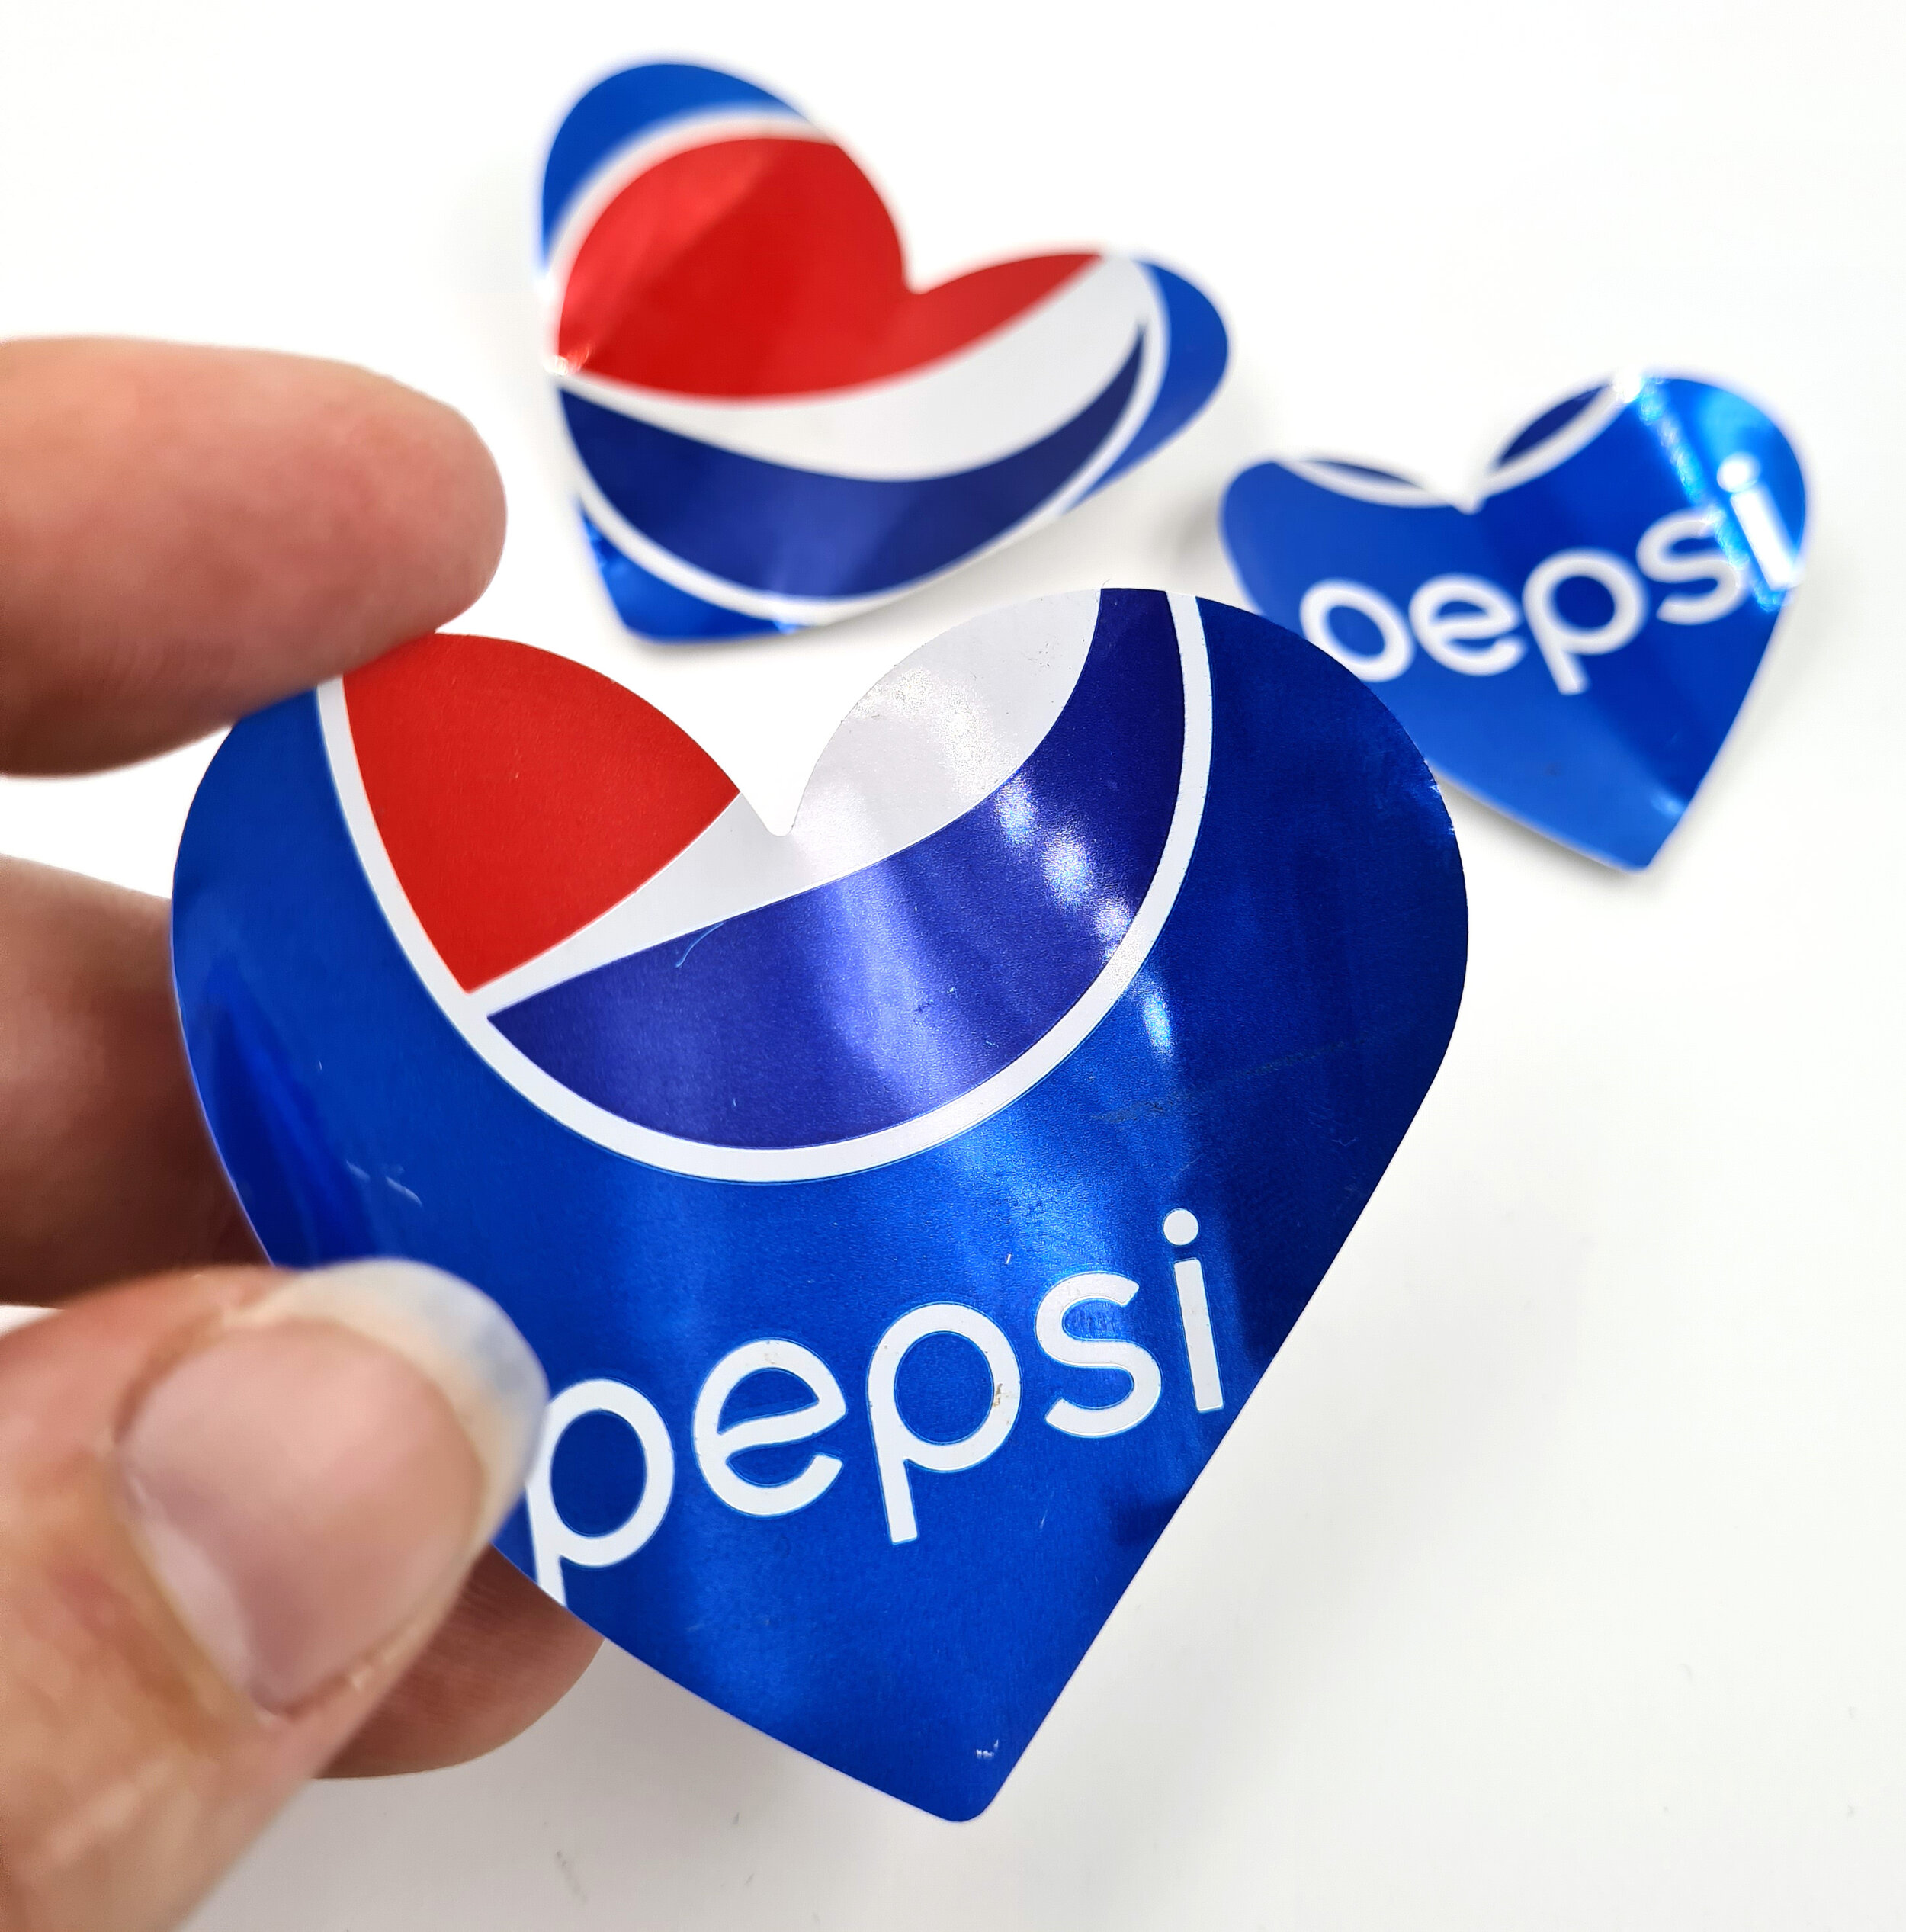 Pepsi red blue and white Heart Can Magnets holding